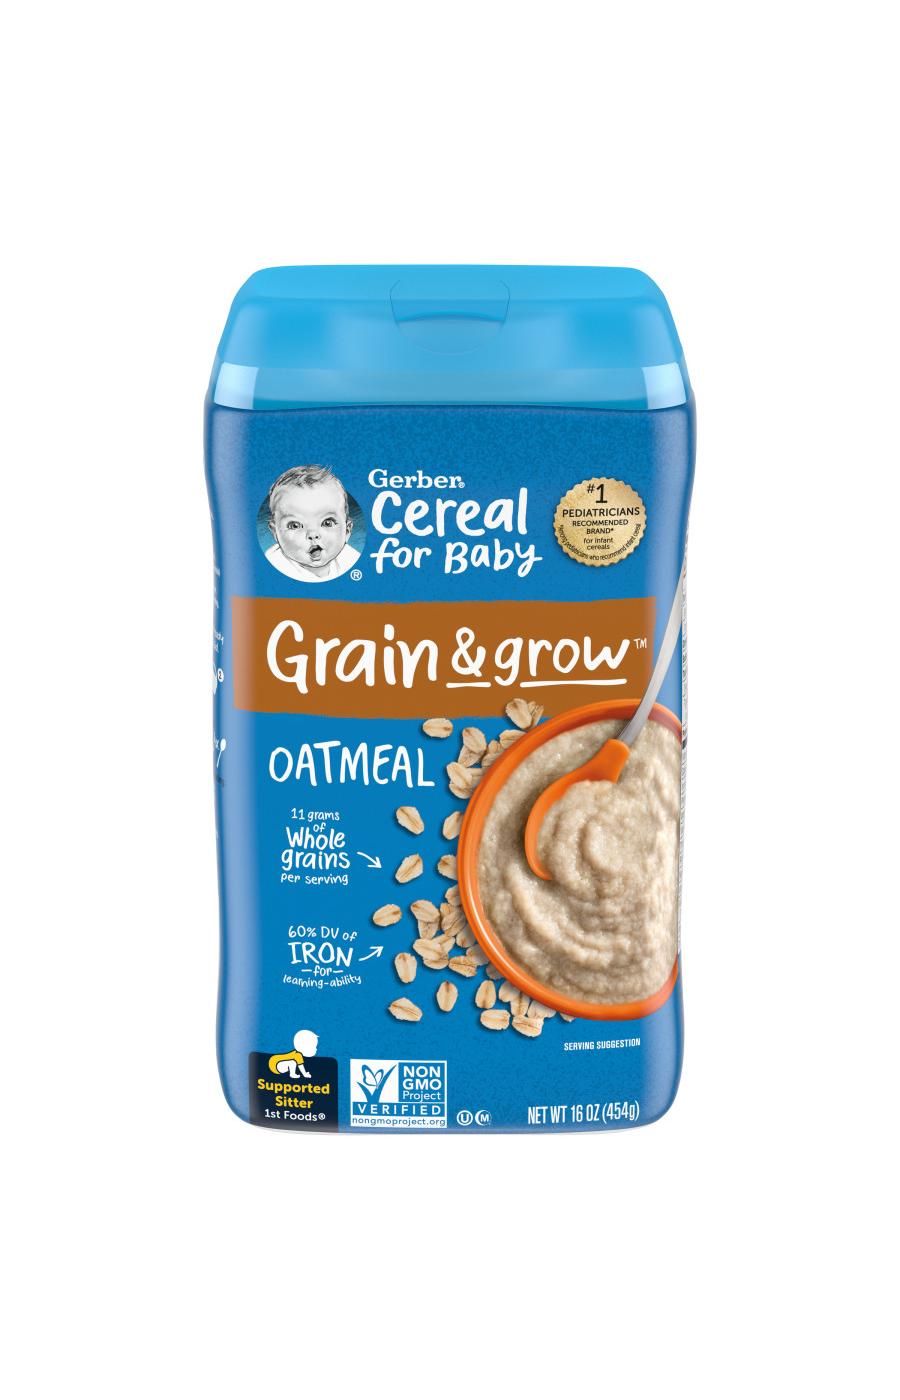 Gerber Cereal for Baby Grain & Grow - Oatmeal; image 1 of 8